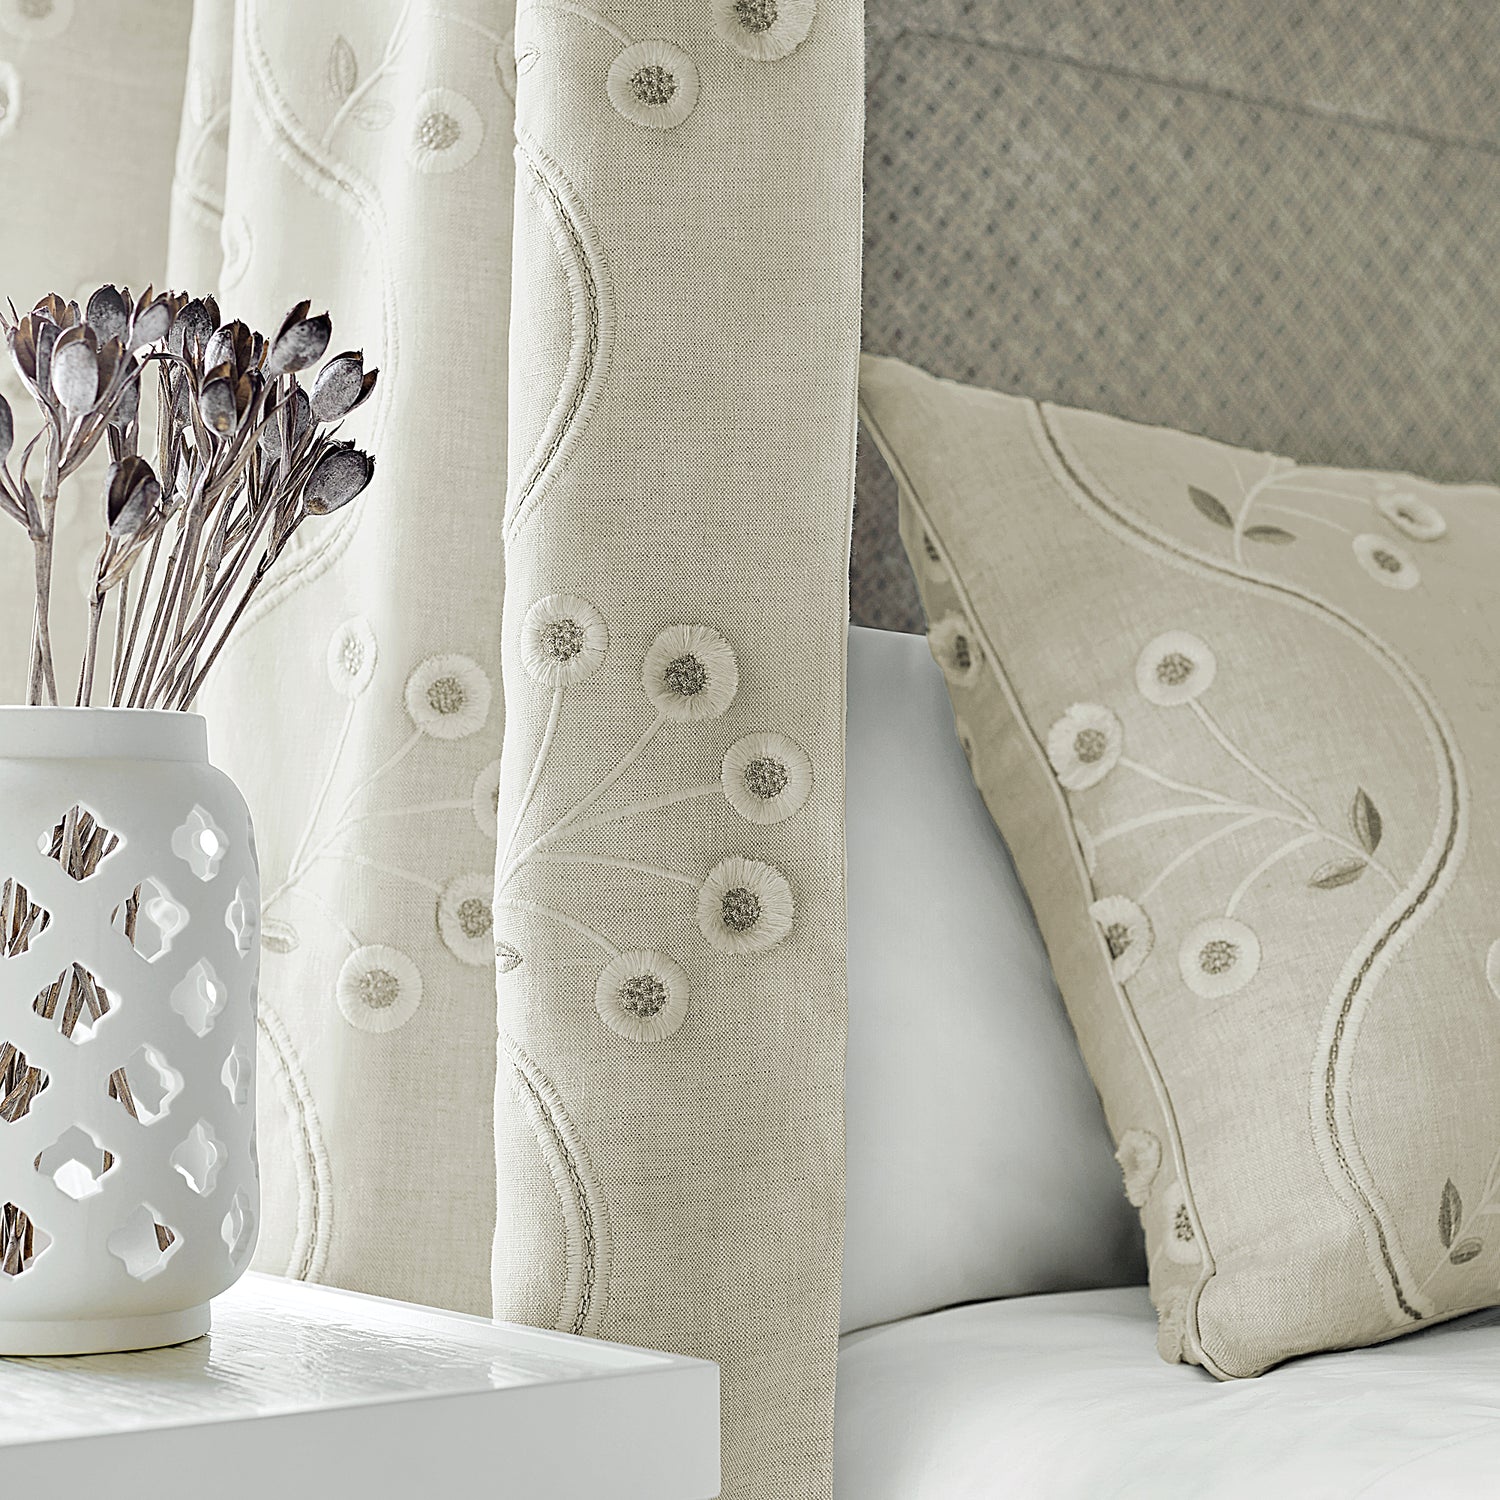 Draperies and pillow made from Olympus Embroidery fabric in natural color - pattern number AW9100 - by Anna French